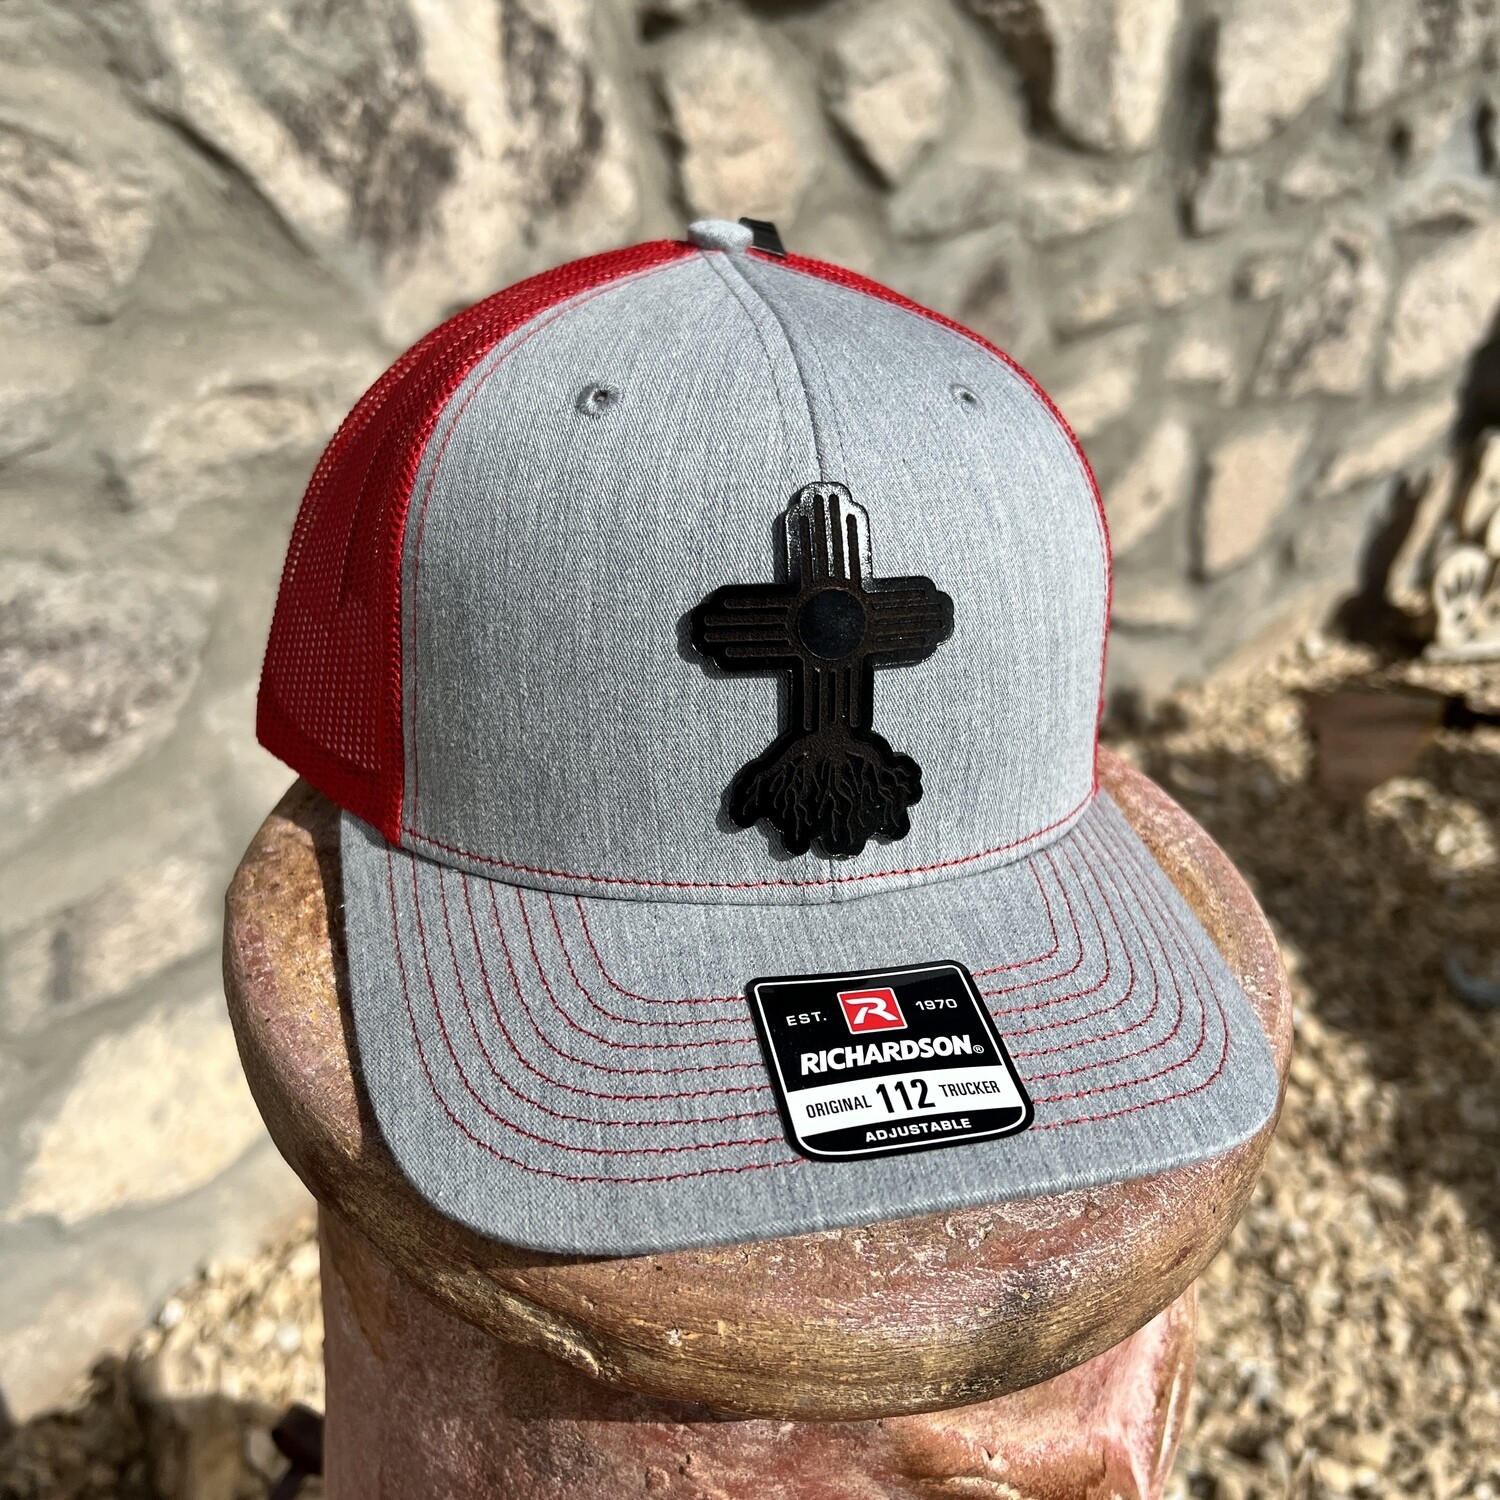 Richardson Snapback 112 Zia Roots Black Leather patch on Heather Gray/Red Hat